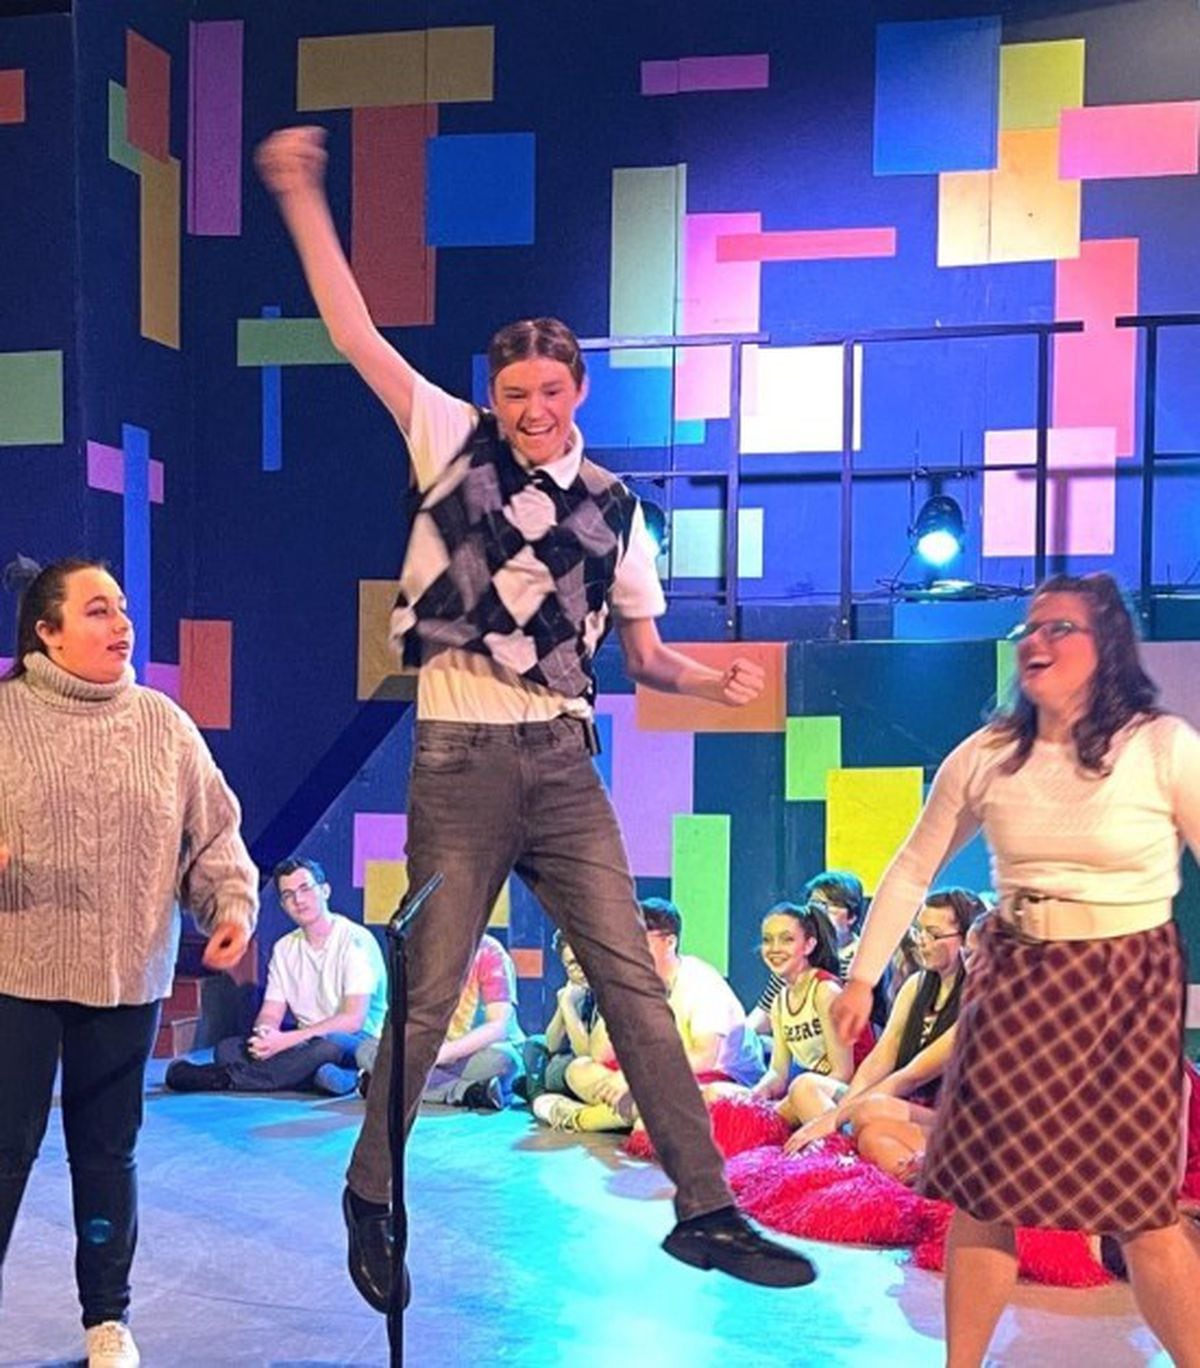 Wrockwardine Wood pupils are going back to the '80s in new musical